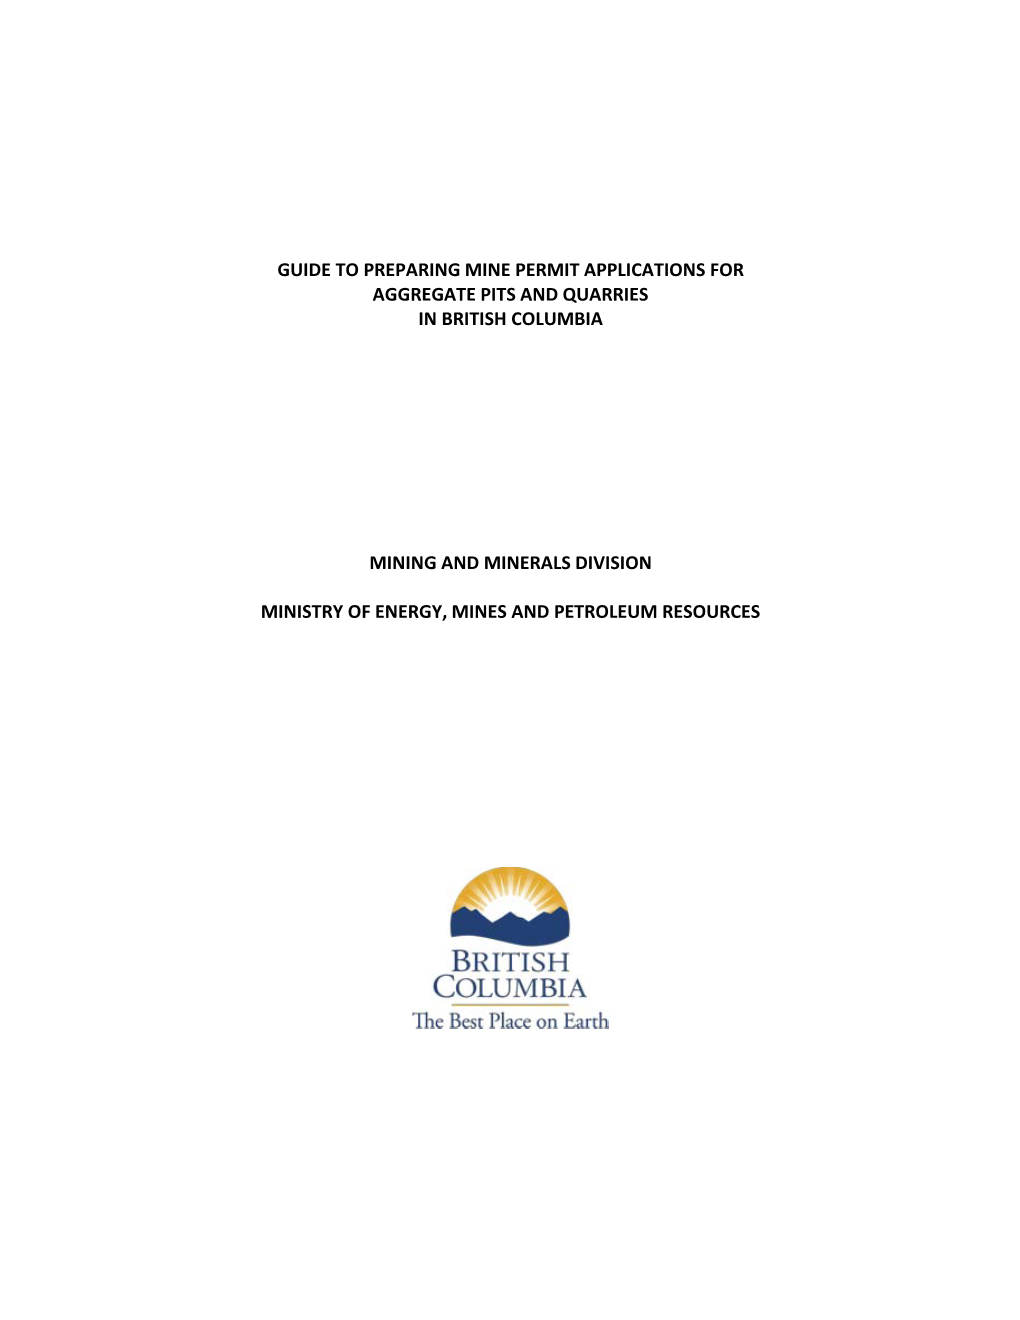 Guide to Preparing Mine Permit Applications for Aggregate Pits and Quarries in British Columbia